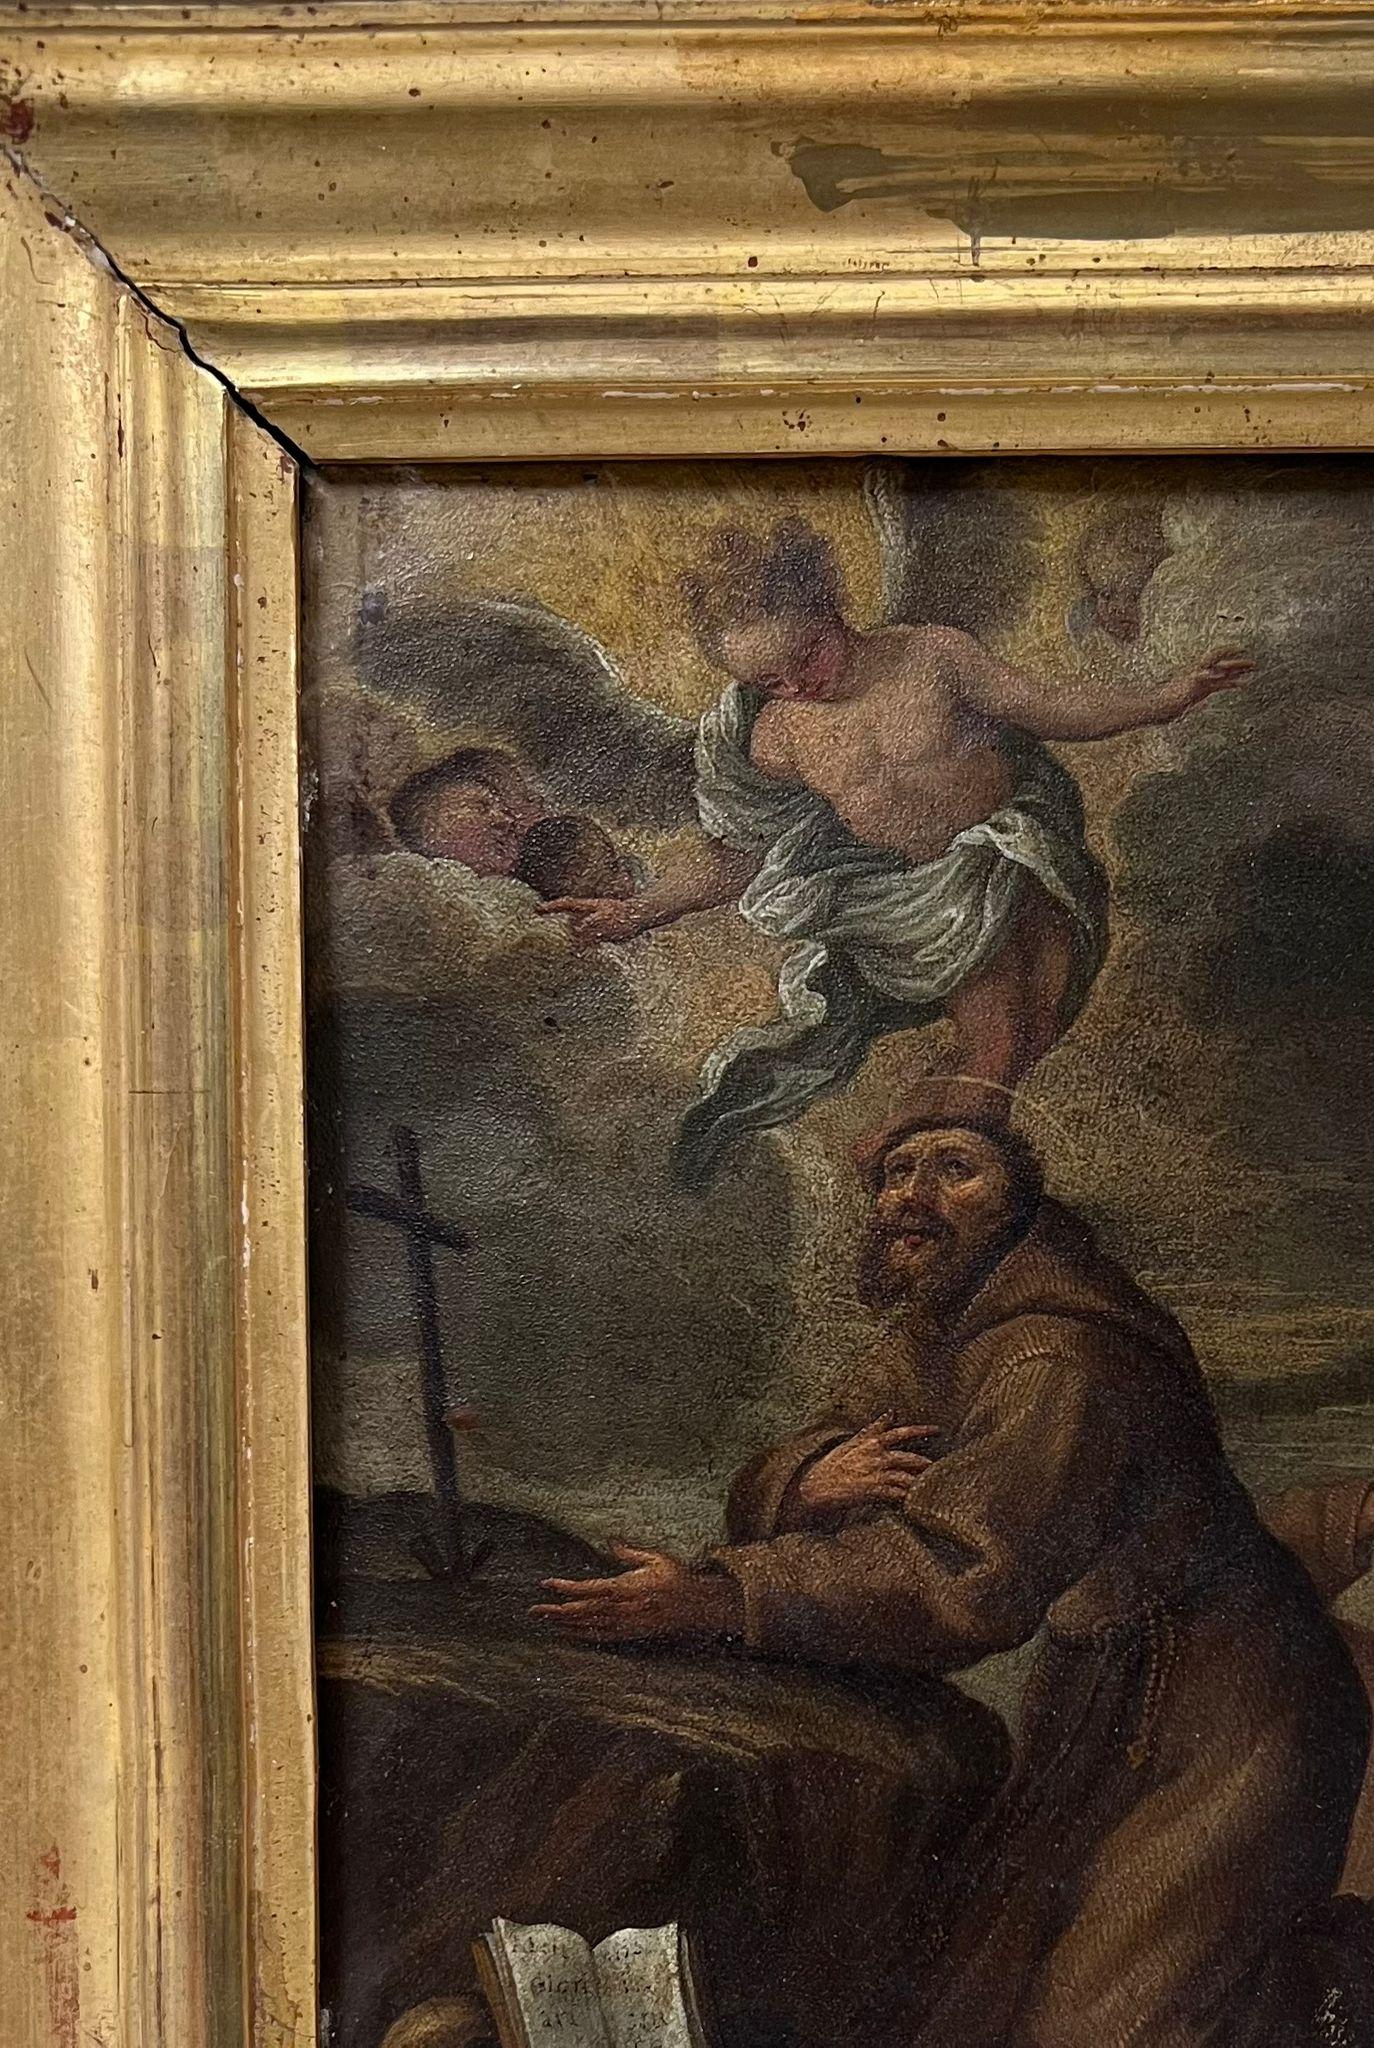 The Penitent Saint
Italian artist, 17th century
oil on copper panel, framed
framed: 10 x 8 inches
copper panel : 7.5 x 5 inches
provenance: private collection, France
condition: very good and sound condition for its age. The frame is antique but has